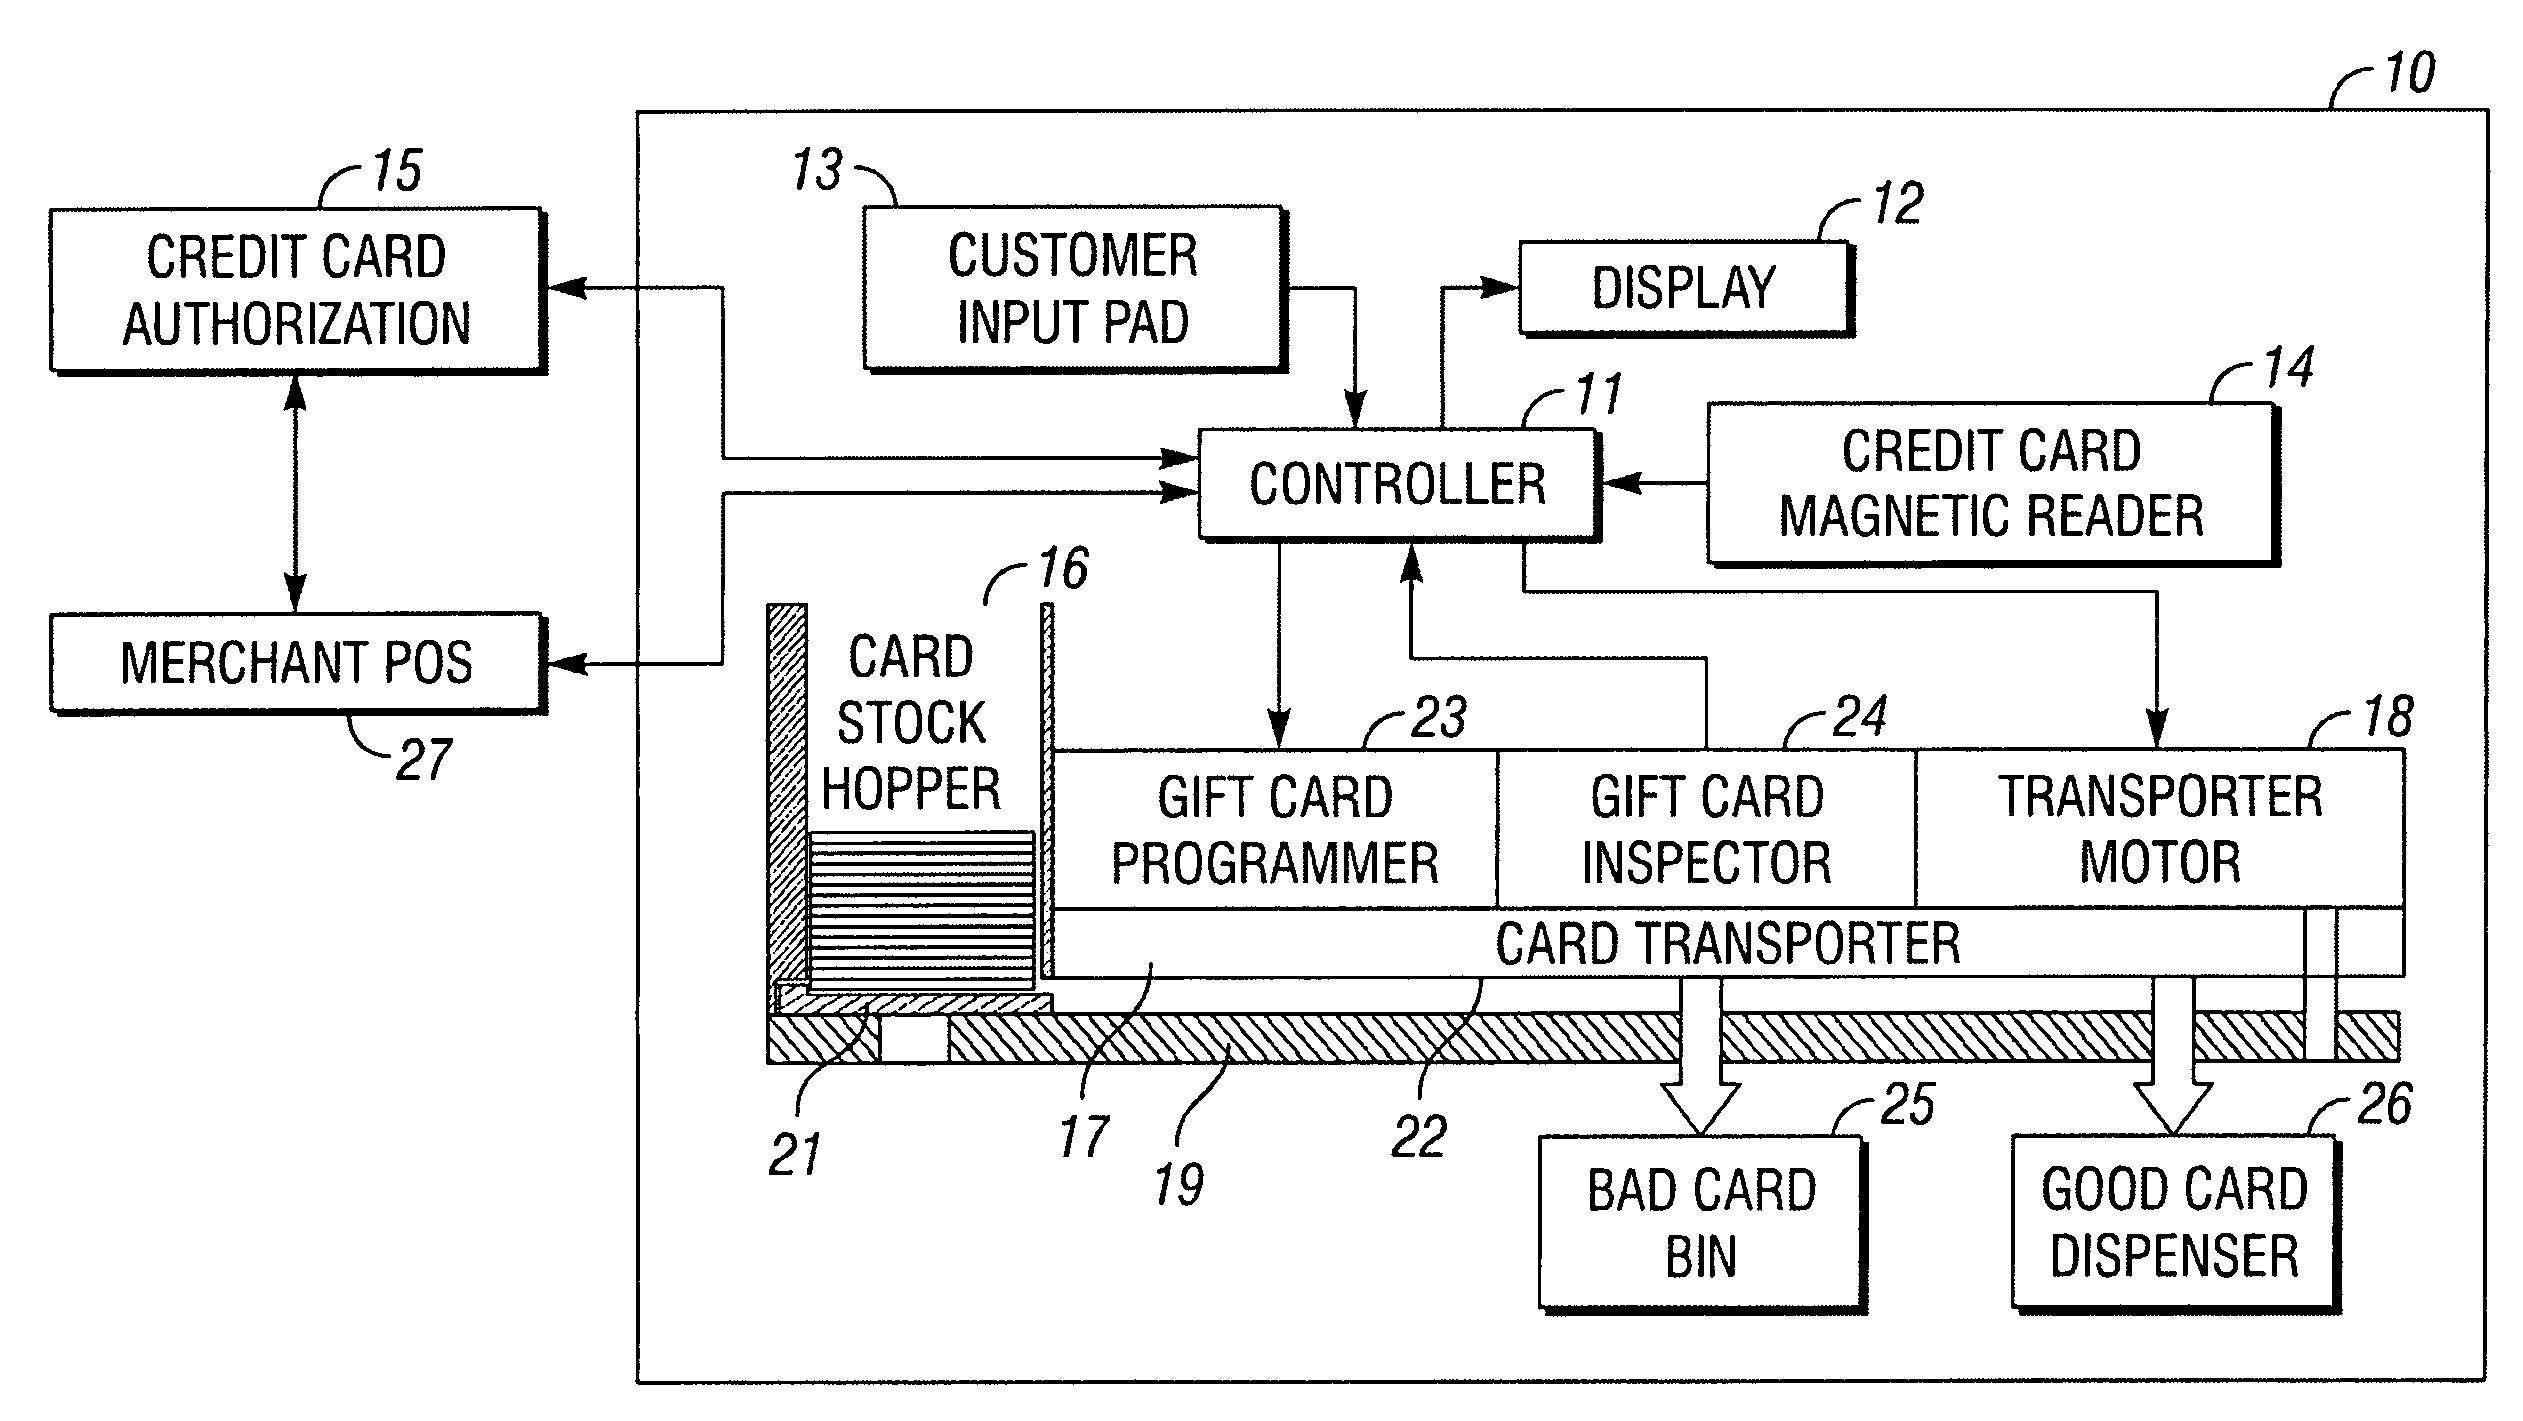 Method and apparatus for generating and dispensing gift cards